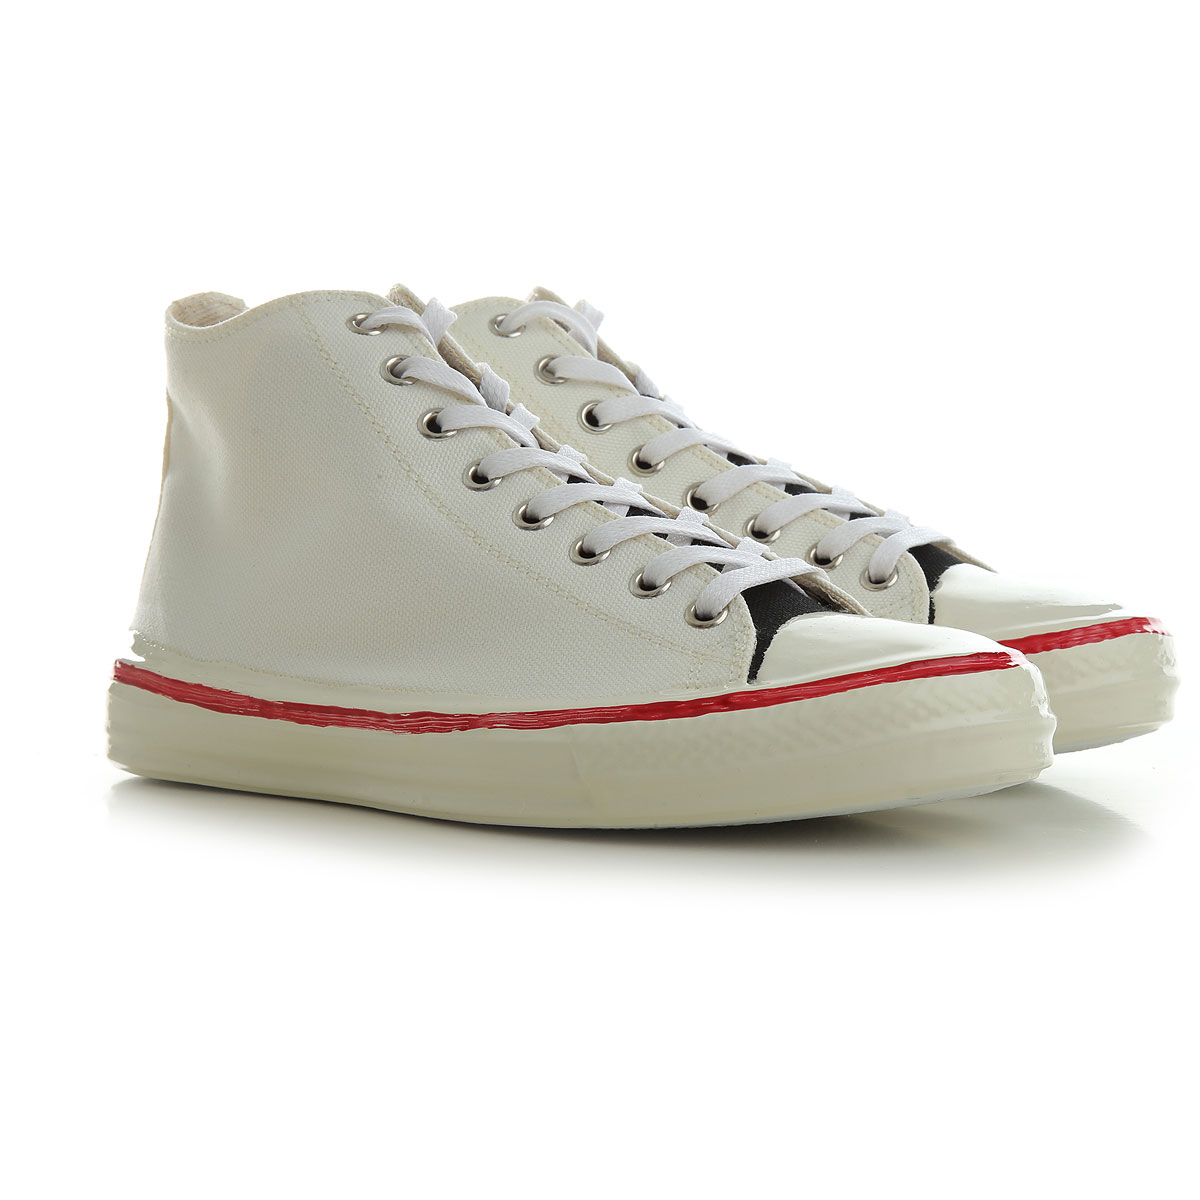 Womens Shoes Marni, Style code: snzw006602-p3571-zn070